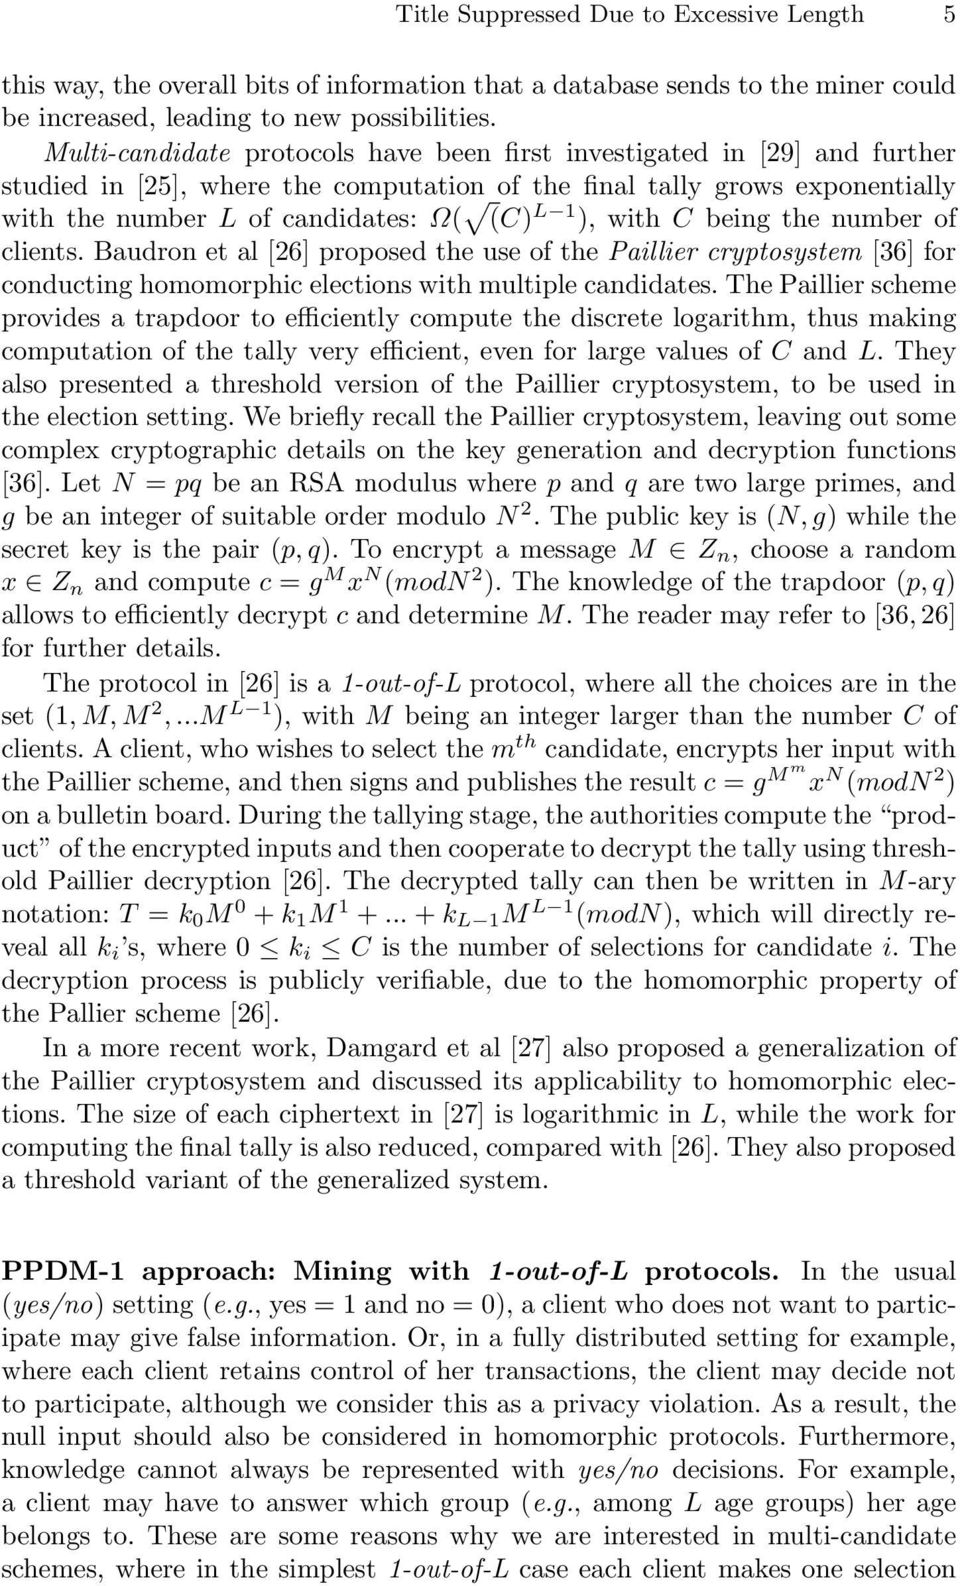 with C being the number of clients. Baudron et al [26] proposed the use of the Paillier cryptosystem [36] for conducting homomorphic elections with multiple candidates.